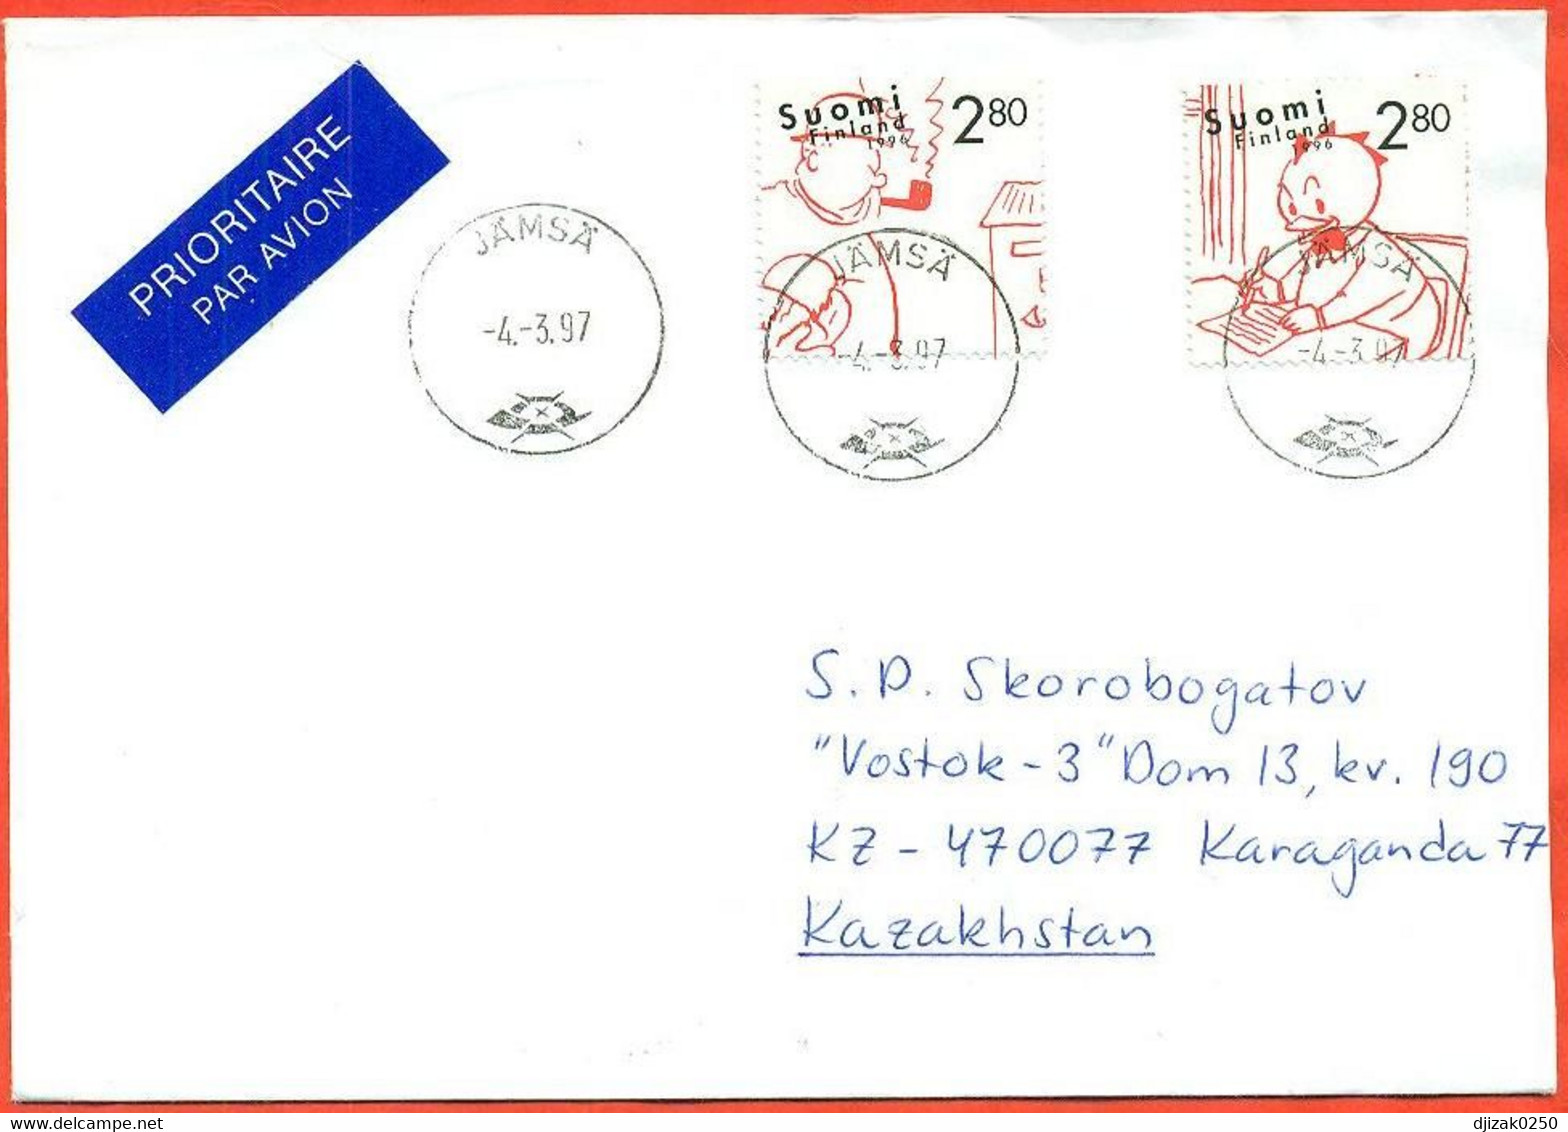 Finland 1997.The Envelope Passed Through The Mail. Airmail. - Briefe U. Dokumente